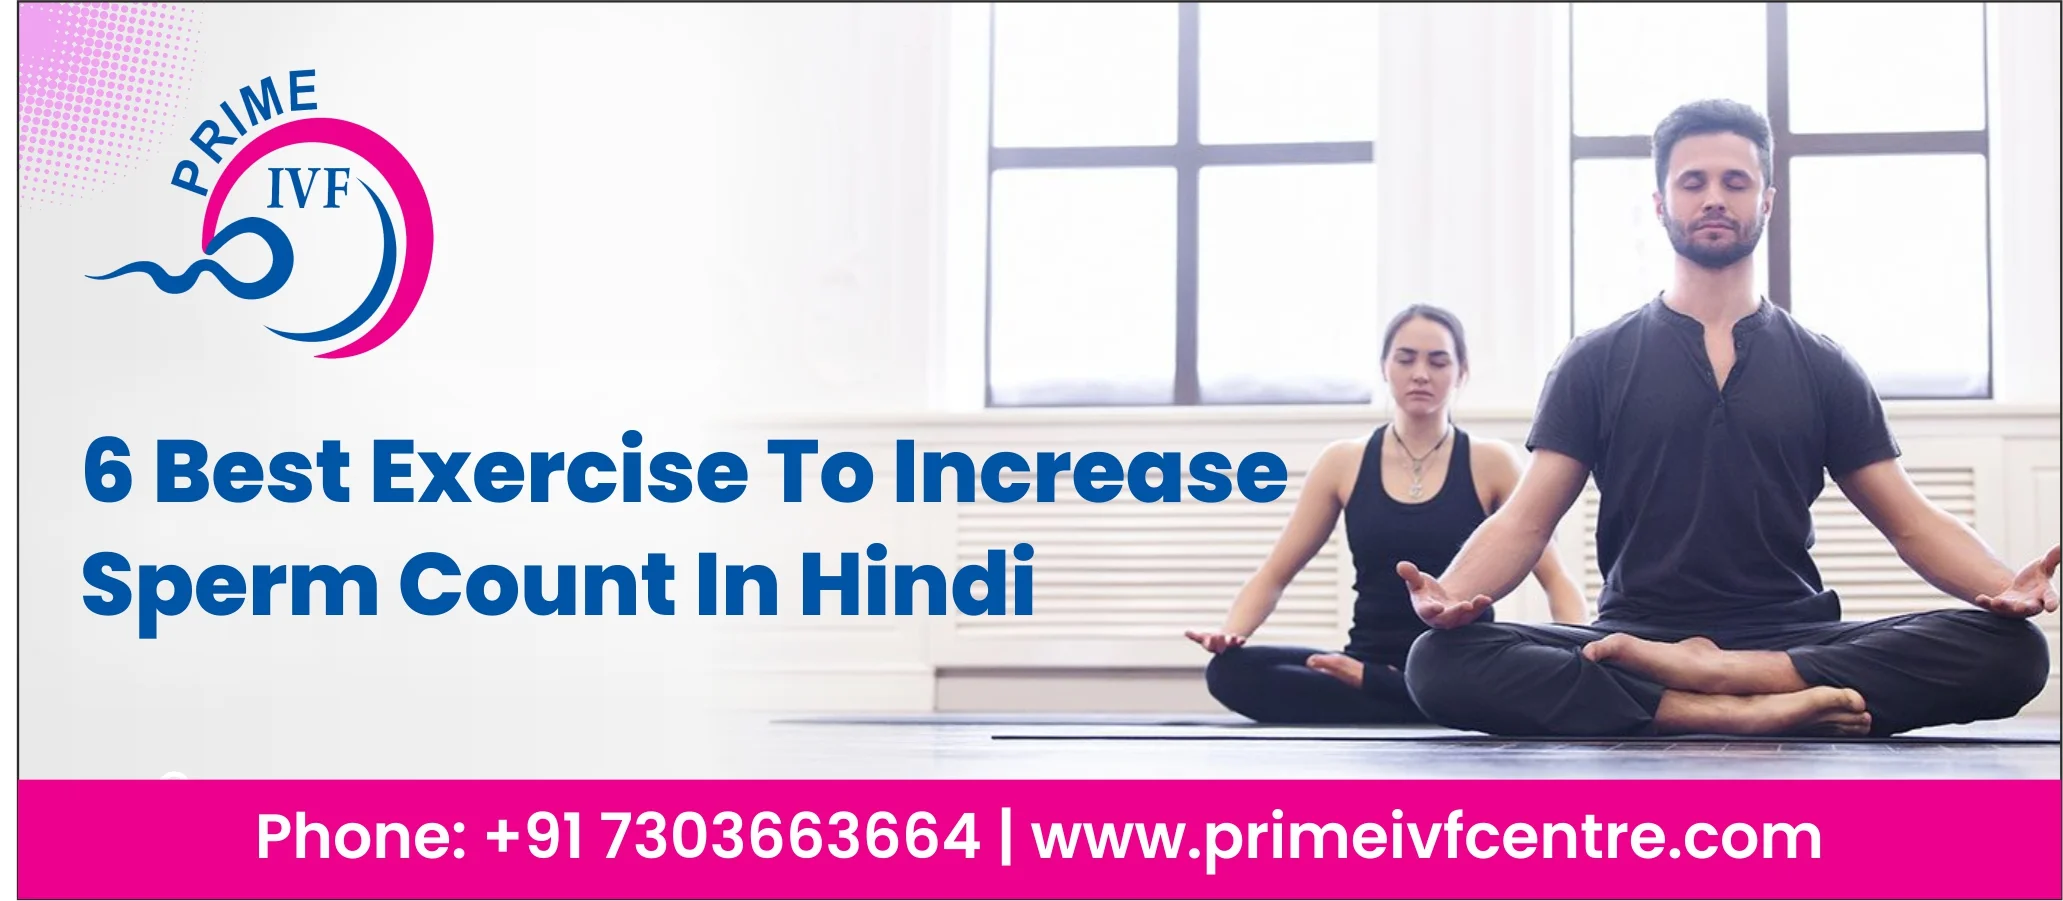 6 Best exercise to increase sperm count In Hindi